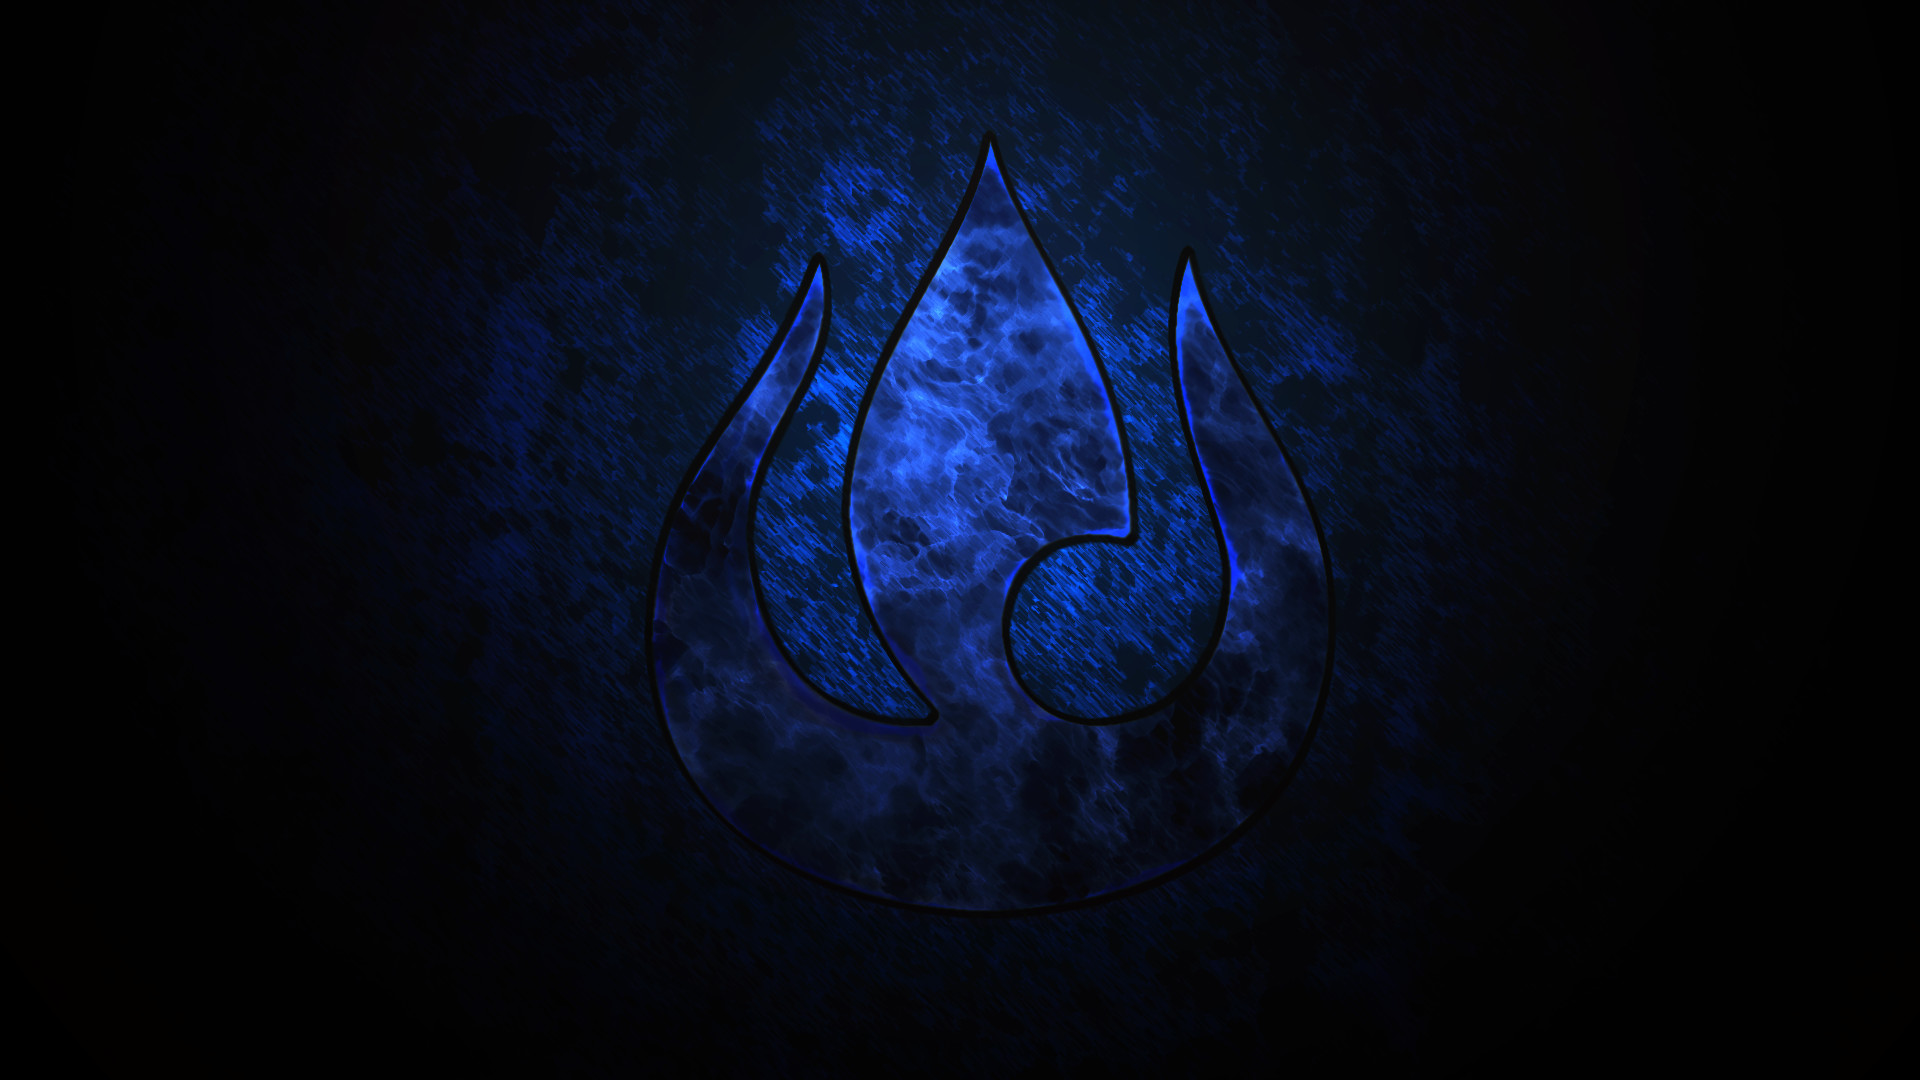 1920x1080 Blue Fire Nation by BL00DYP1R4T3 Blue Fire Nation by BL00DYP1R4T3